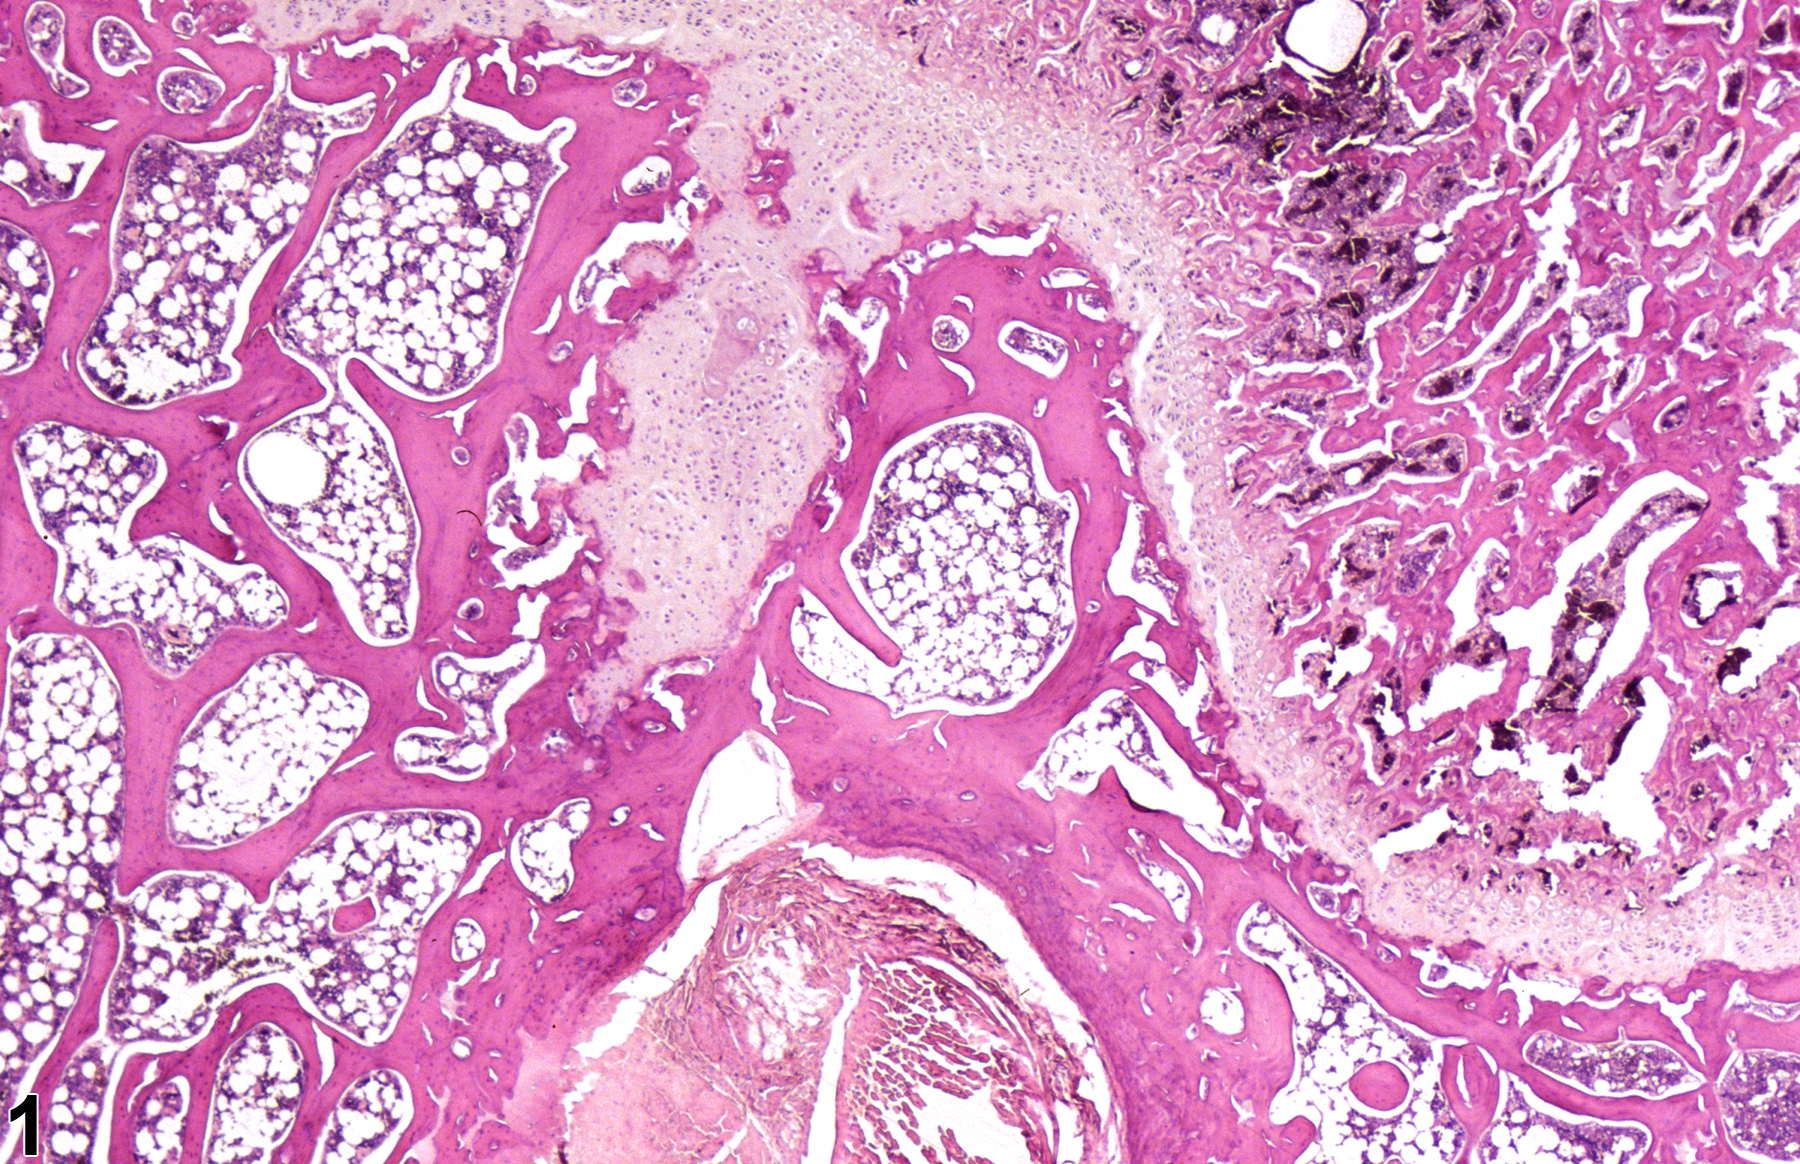 Image of physeal dysplasia in the bone from a male F344/N rat in a subchronic study